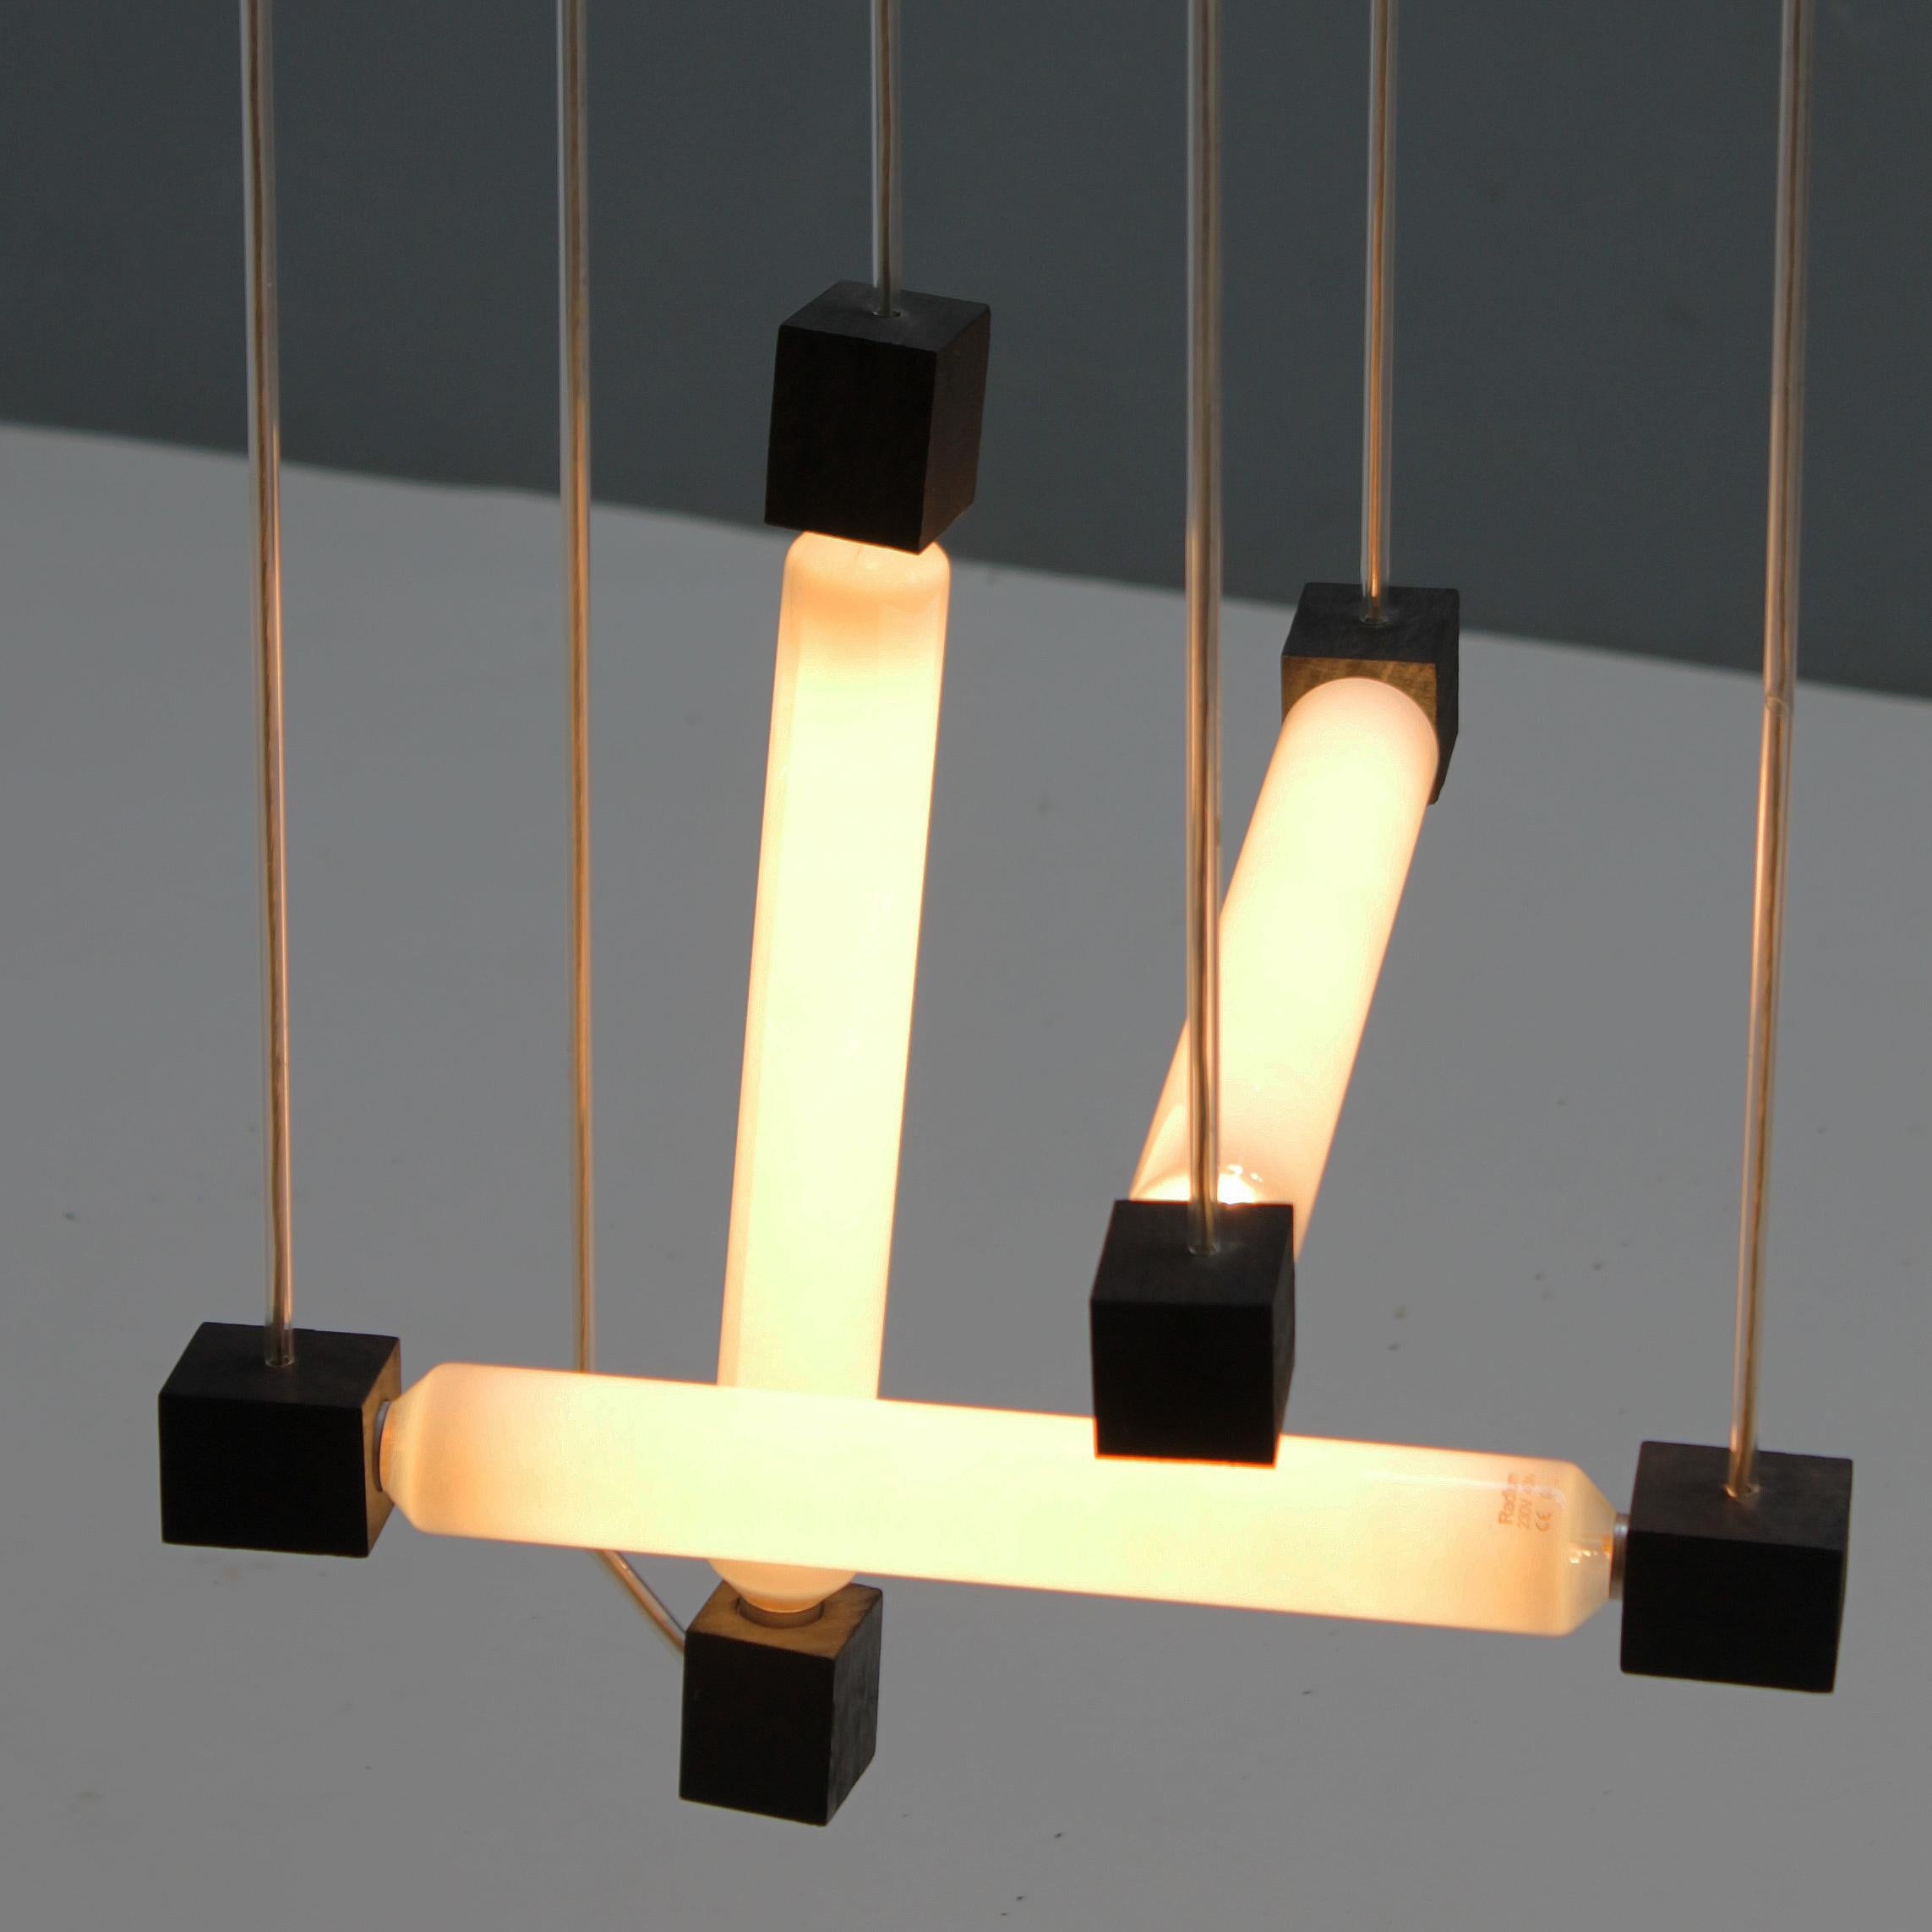 Painted 'Buizenlamp' Attributed to Gerrit Rietveld For Sale